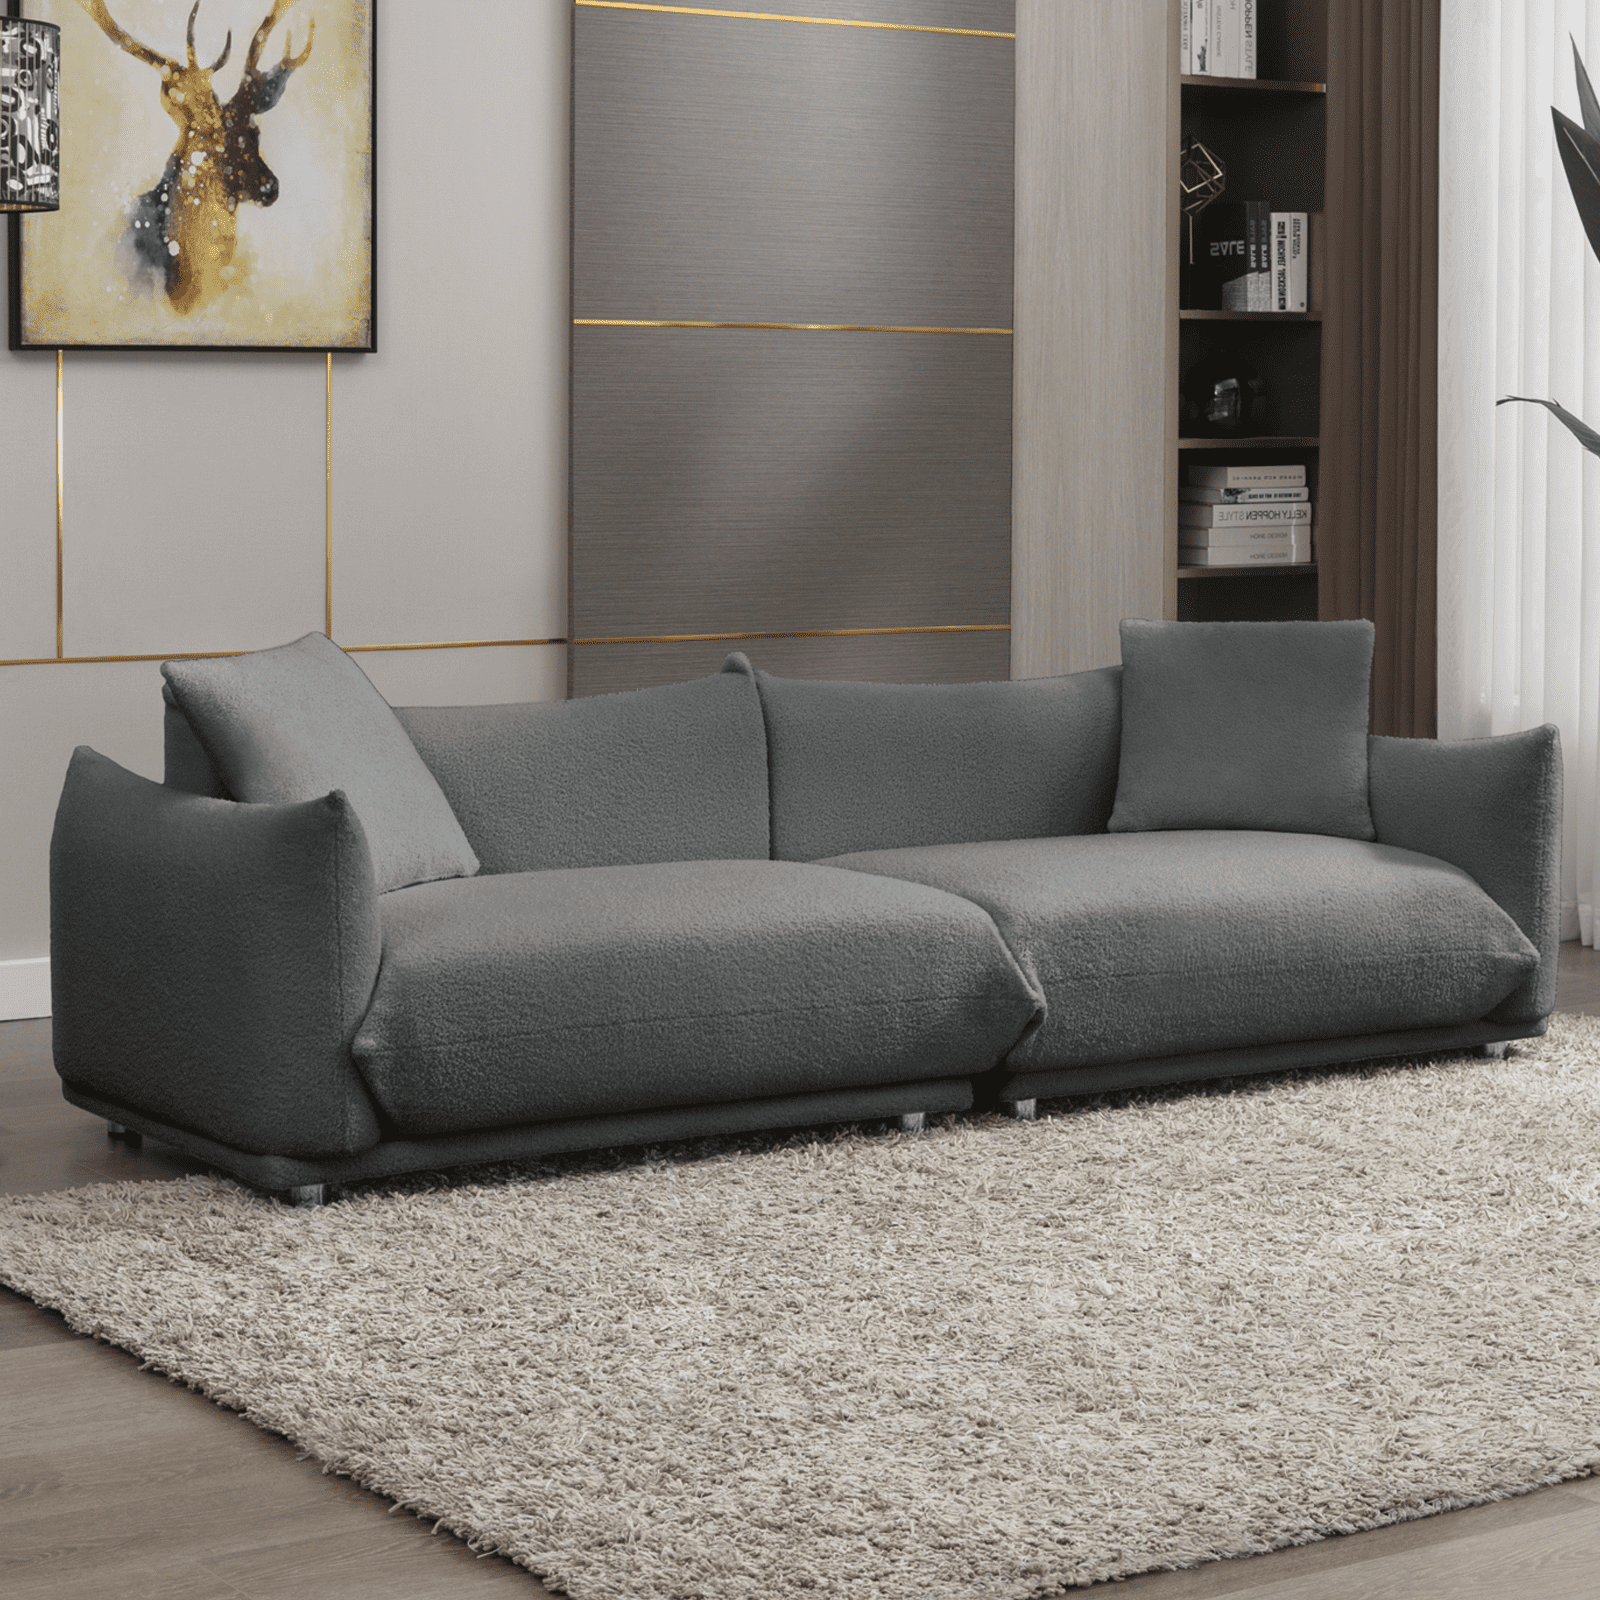 Magic Home 87.7 in. 3 Seat Sofa Gray Teddy Fabric Couch with 2 Pillows, Removable Back and Seat Cushions for Apartment Office